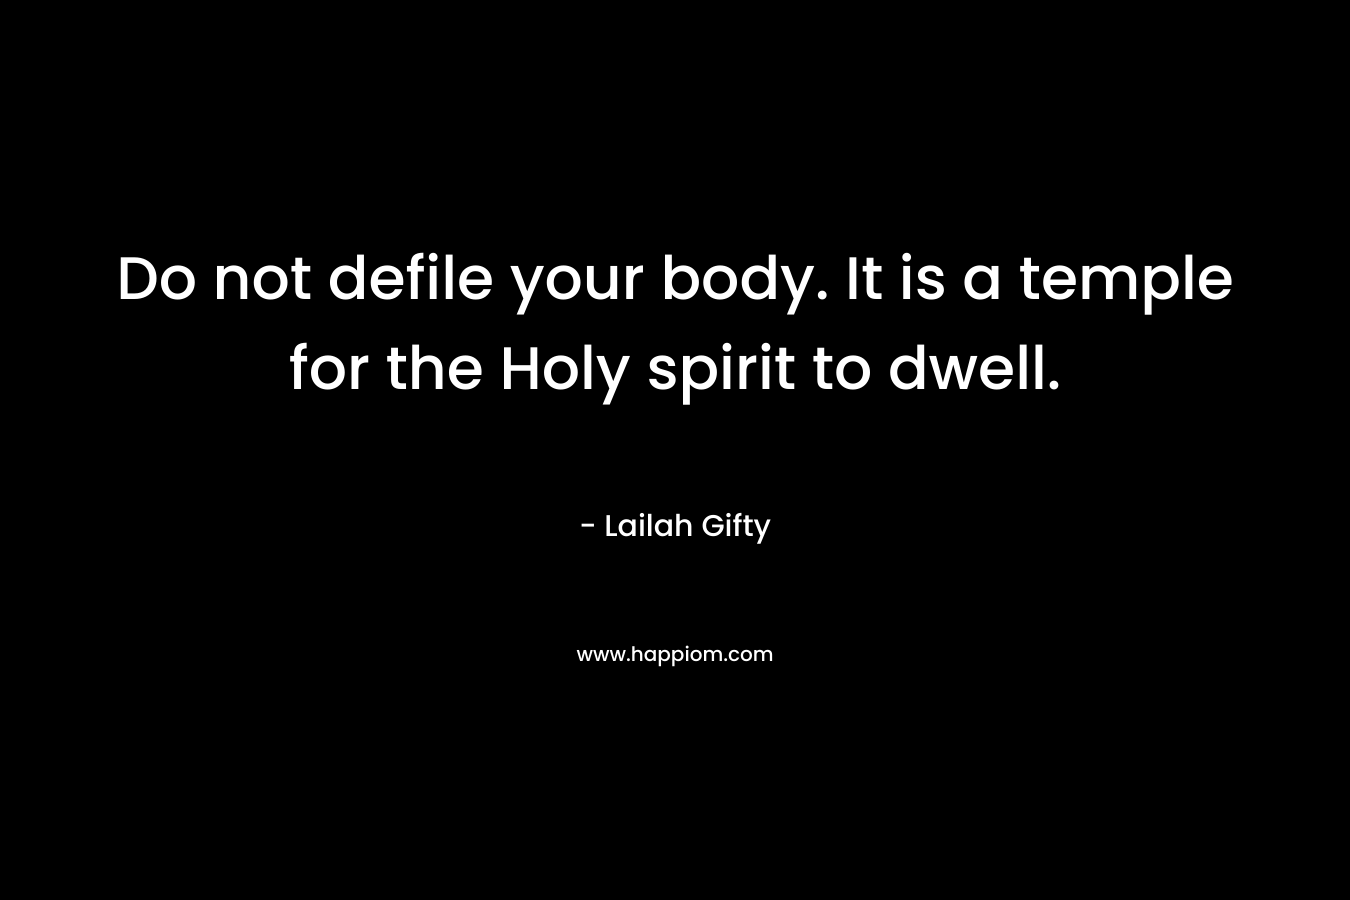 Do not defile your body. It is a temple for the Holy spirit to dwell. – Lailah Gifty